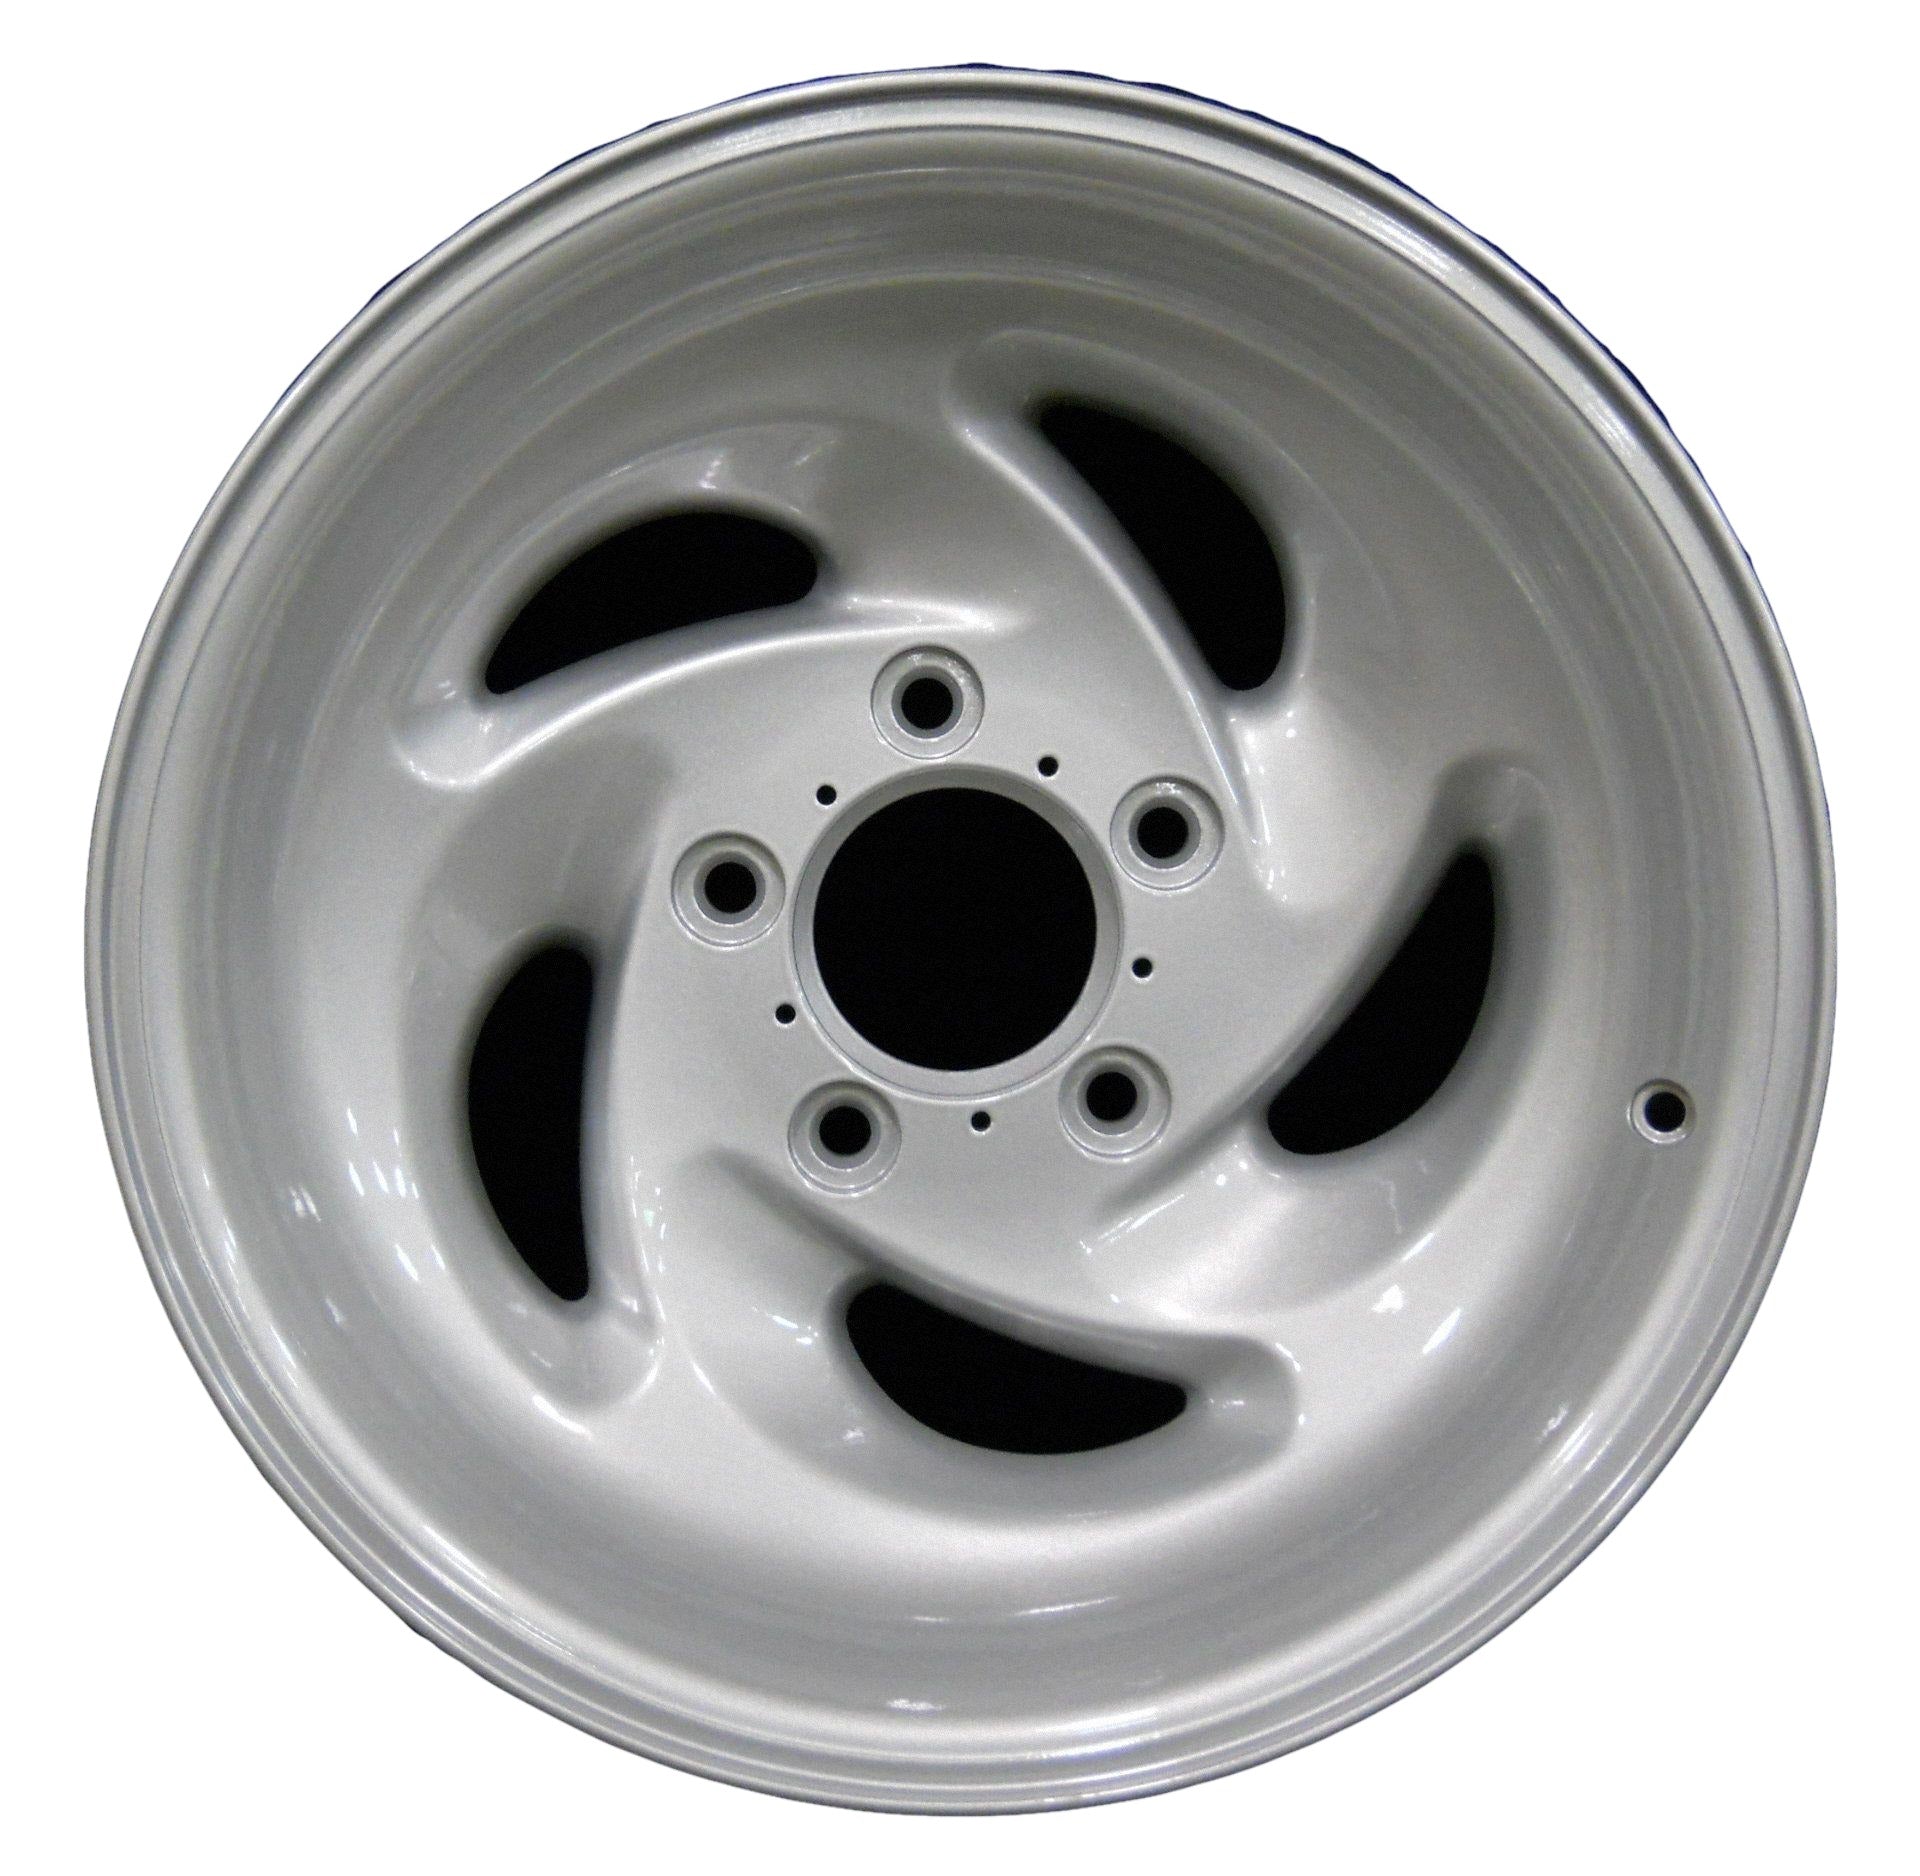 Ford F150 Truck  1993, 1994, 1995, 1996 Factory OEM Car Wheel Size 17x8 Alloy WAO.3079.PS02.FF